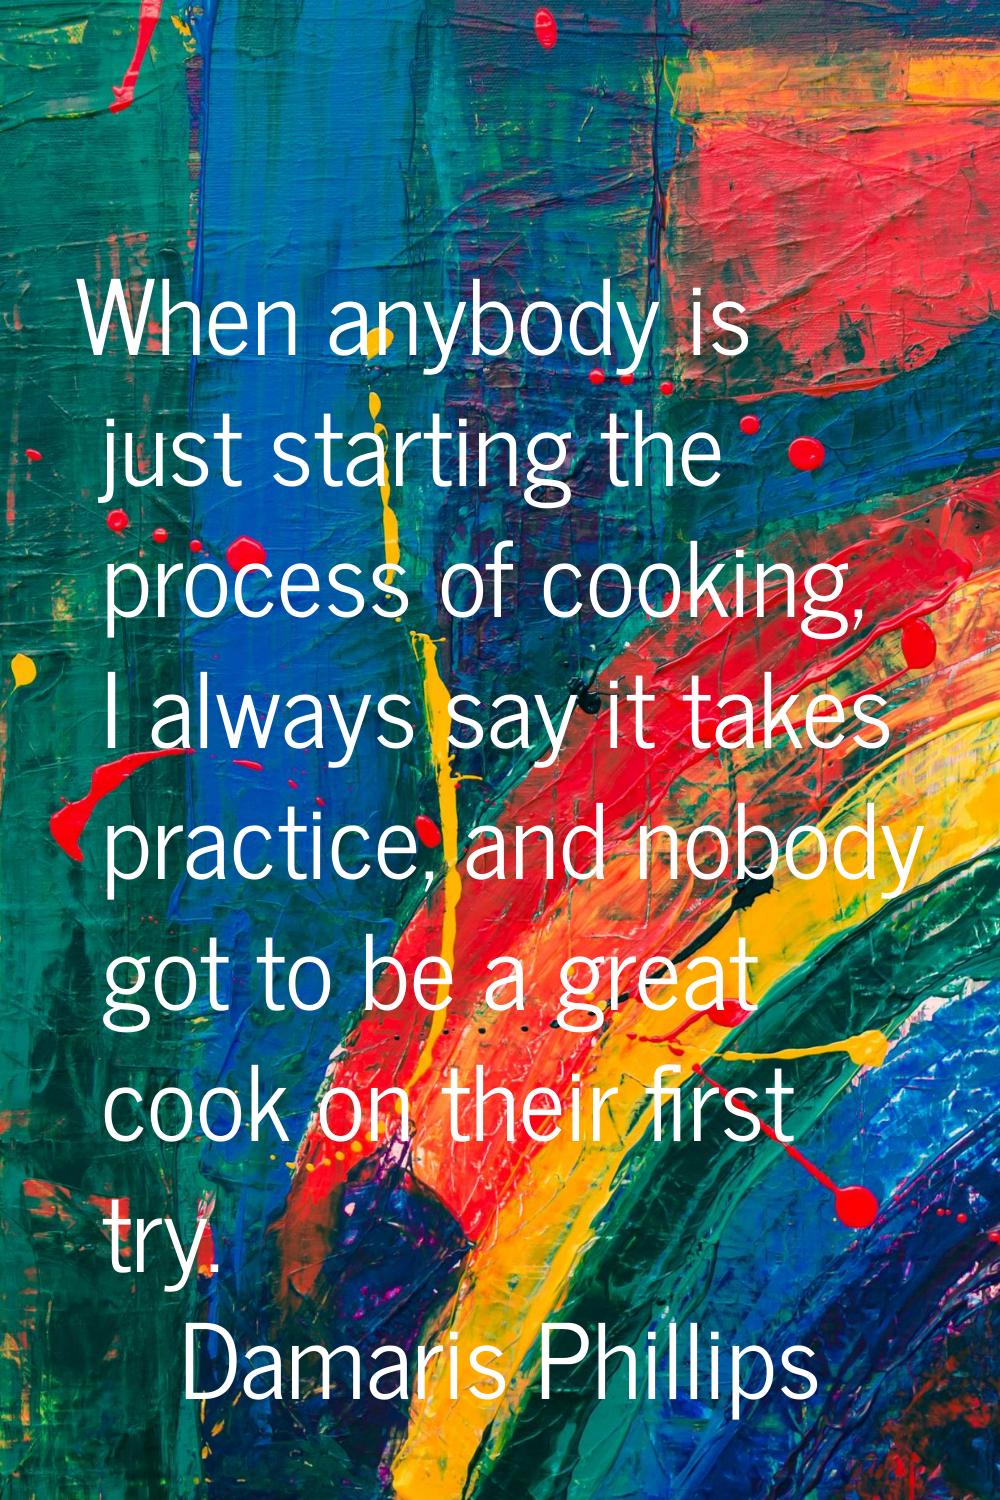 When anybody is just starting the process of cooking, I always say it takes practice, and nobody go